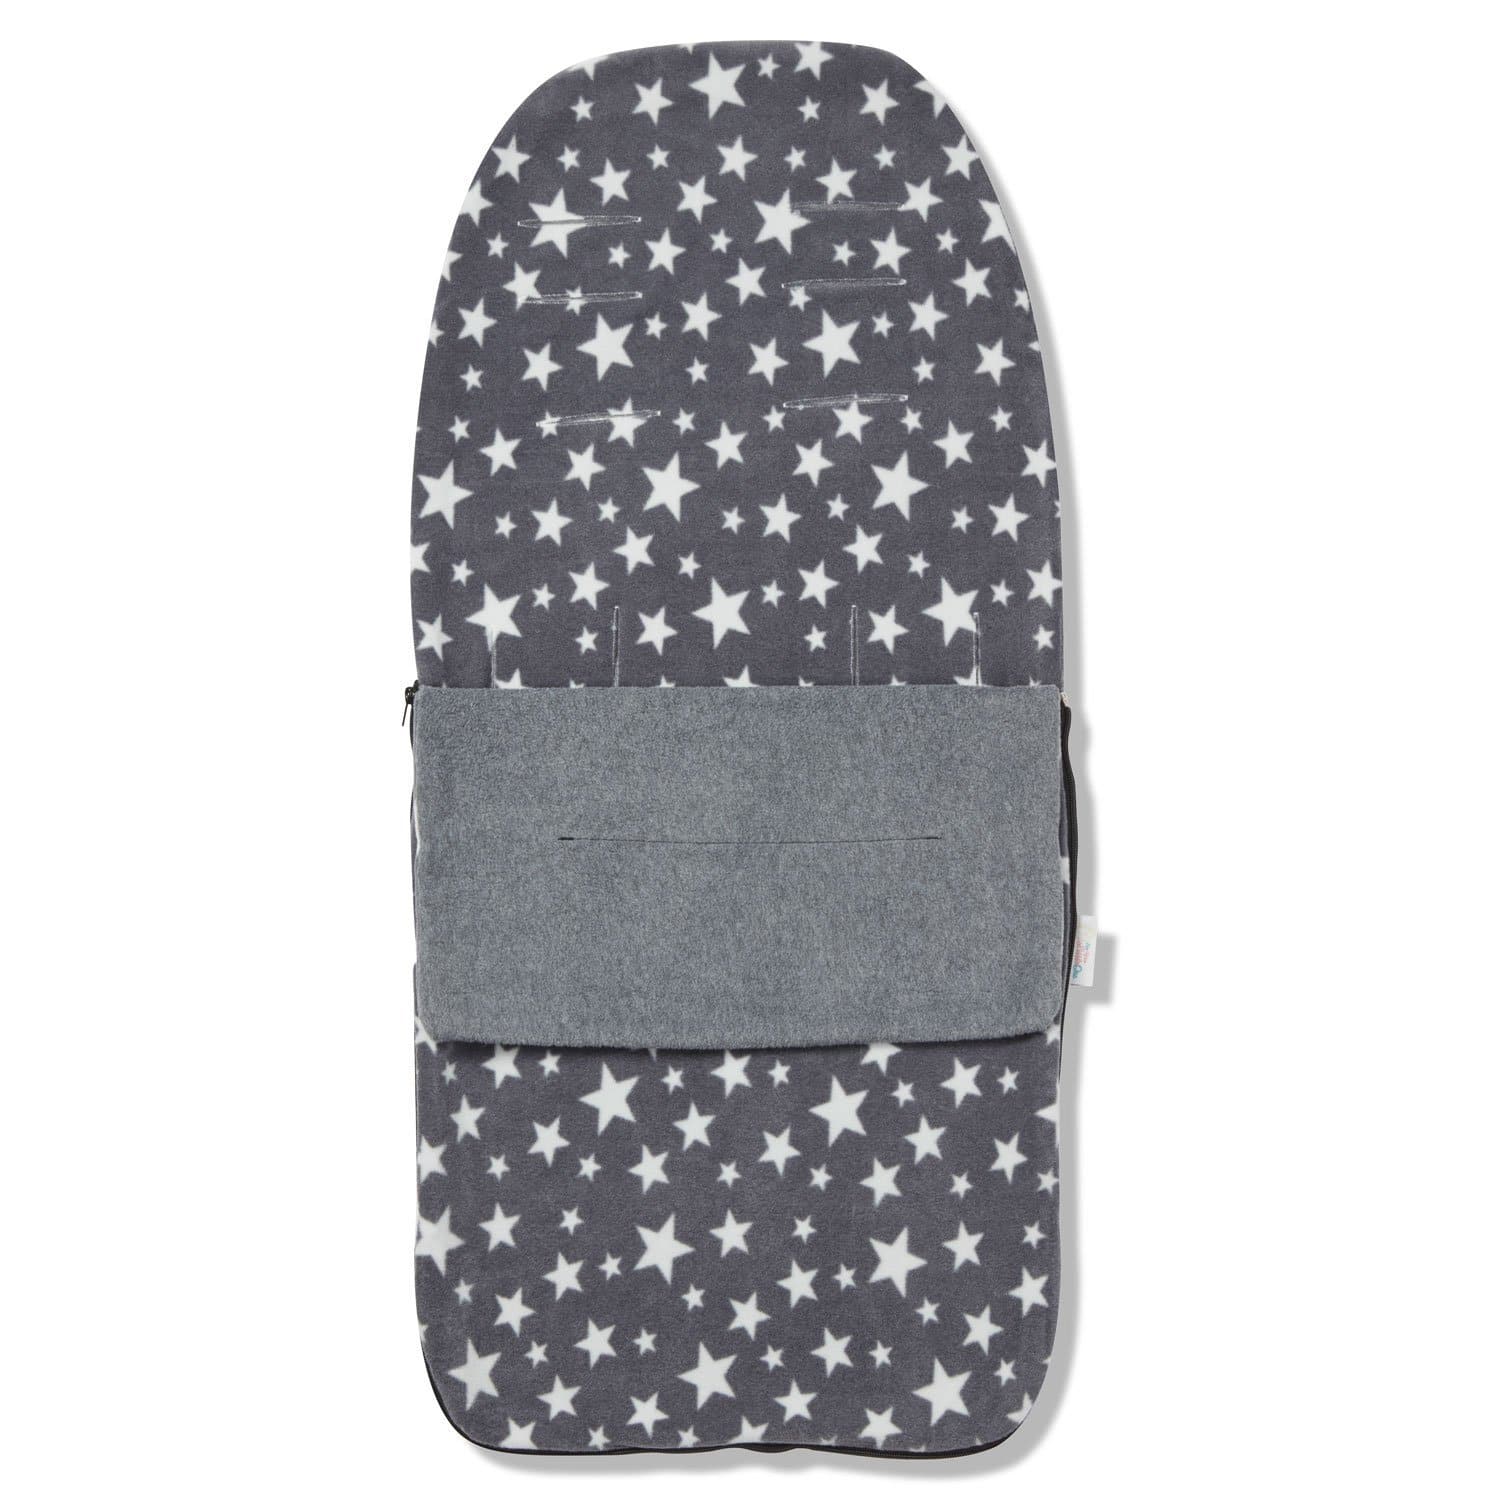 Snuggle Summer Footmuff Compatible with BabiesRus - For Your Little One